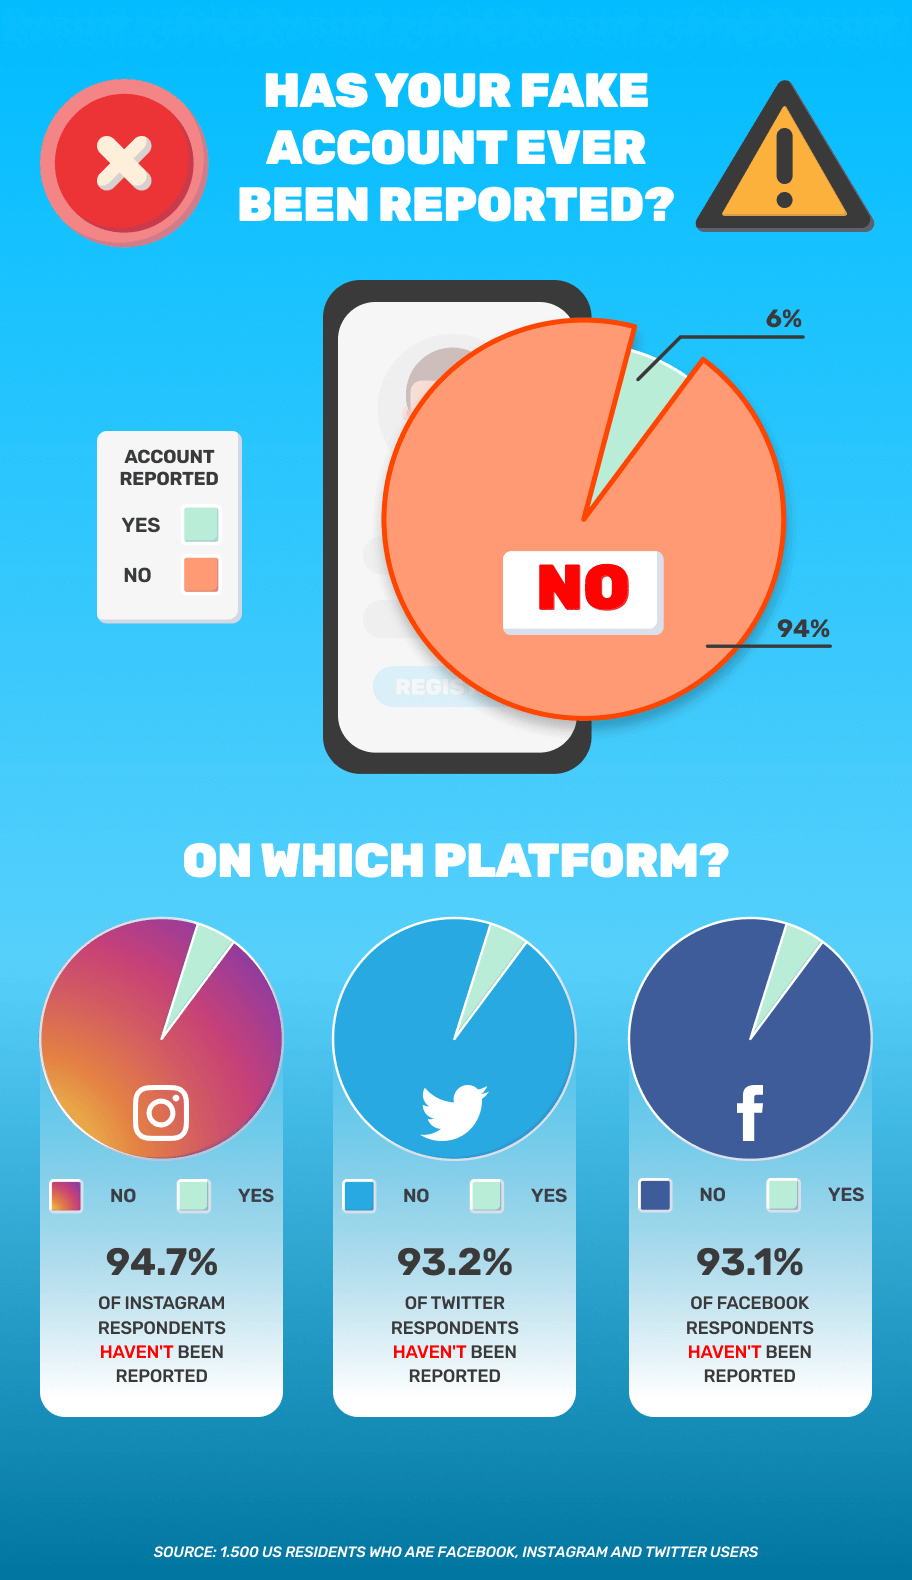 Infographic describes platforms where fake social media accounts have been reported